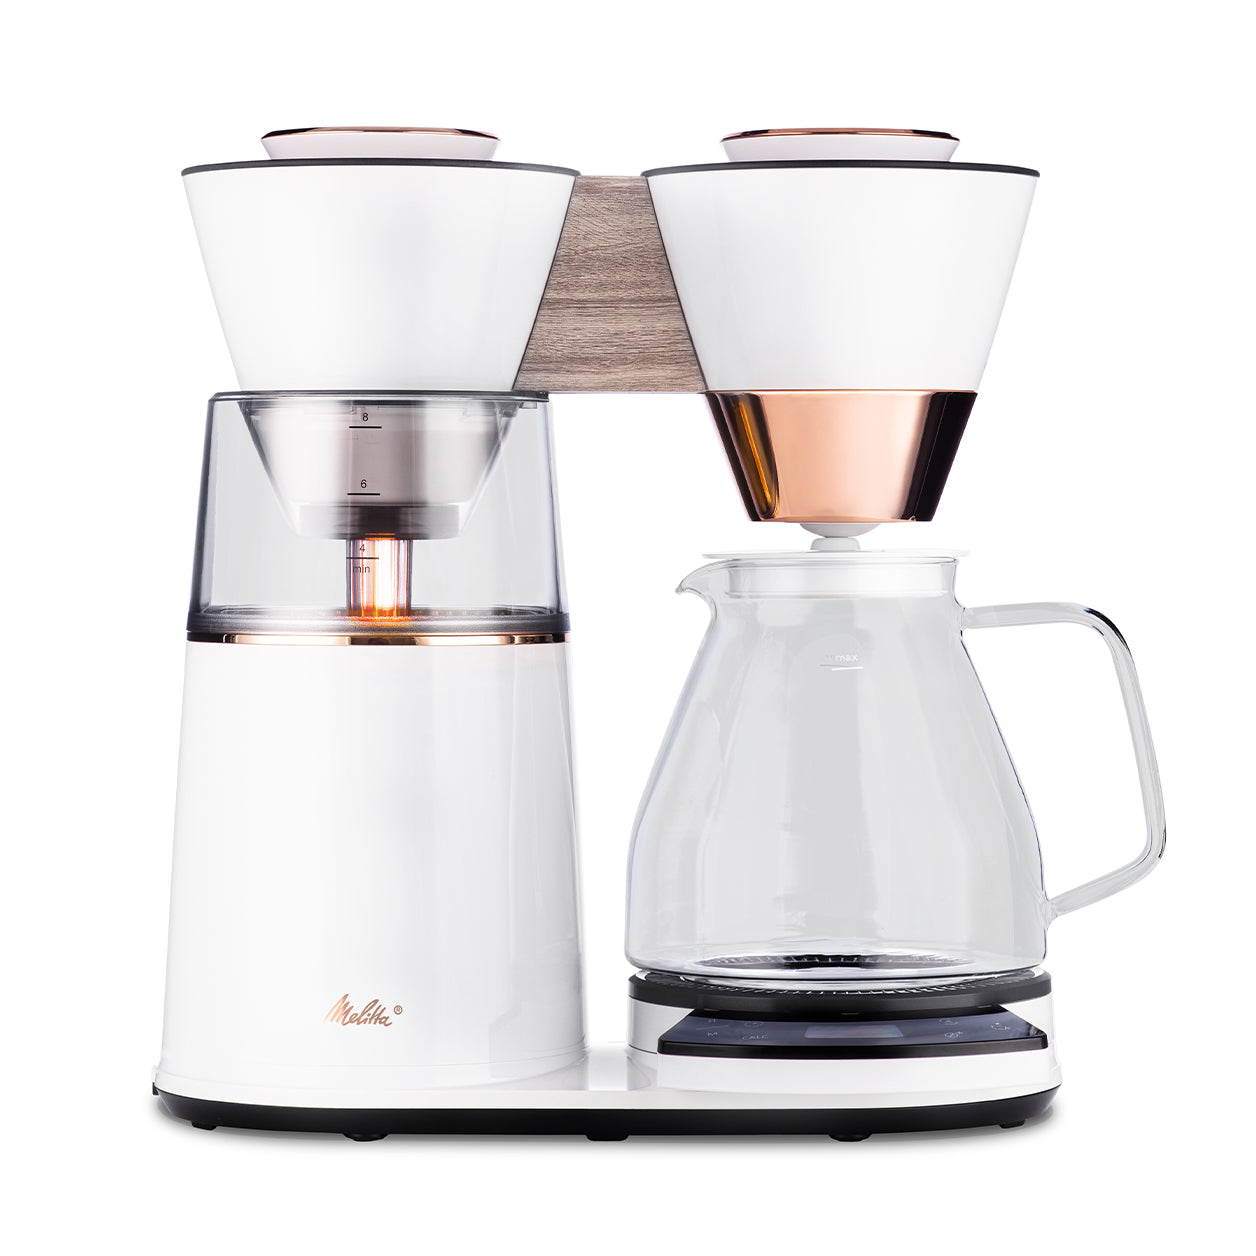 Williams Sonoma Spinn Coffee Maker, Milk Frother, and Travel Mug